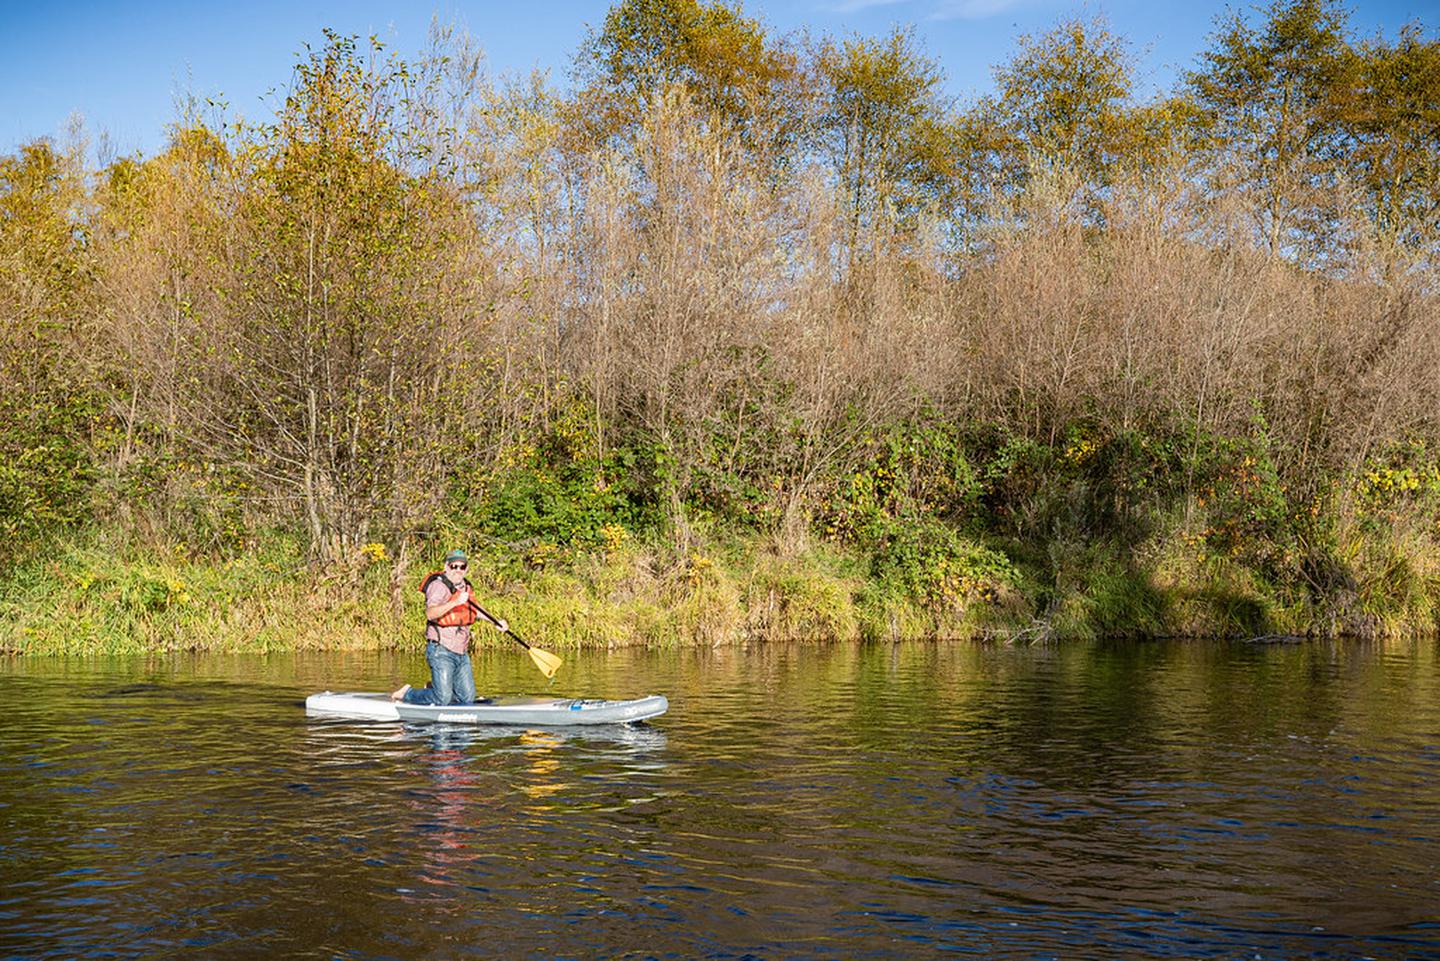 Stand up paddling the Applegate River at Provolt Recreation SIte.Stand up paddling the Applegate River at Provolt Recreation SIte.
